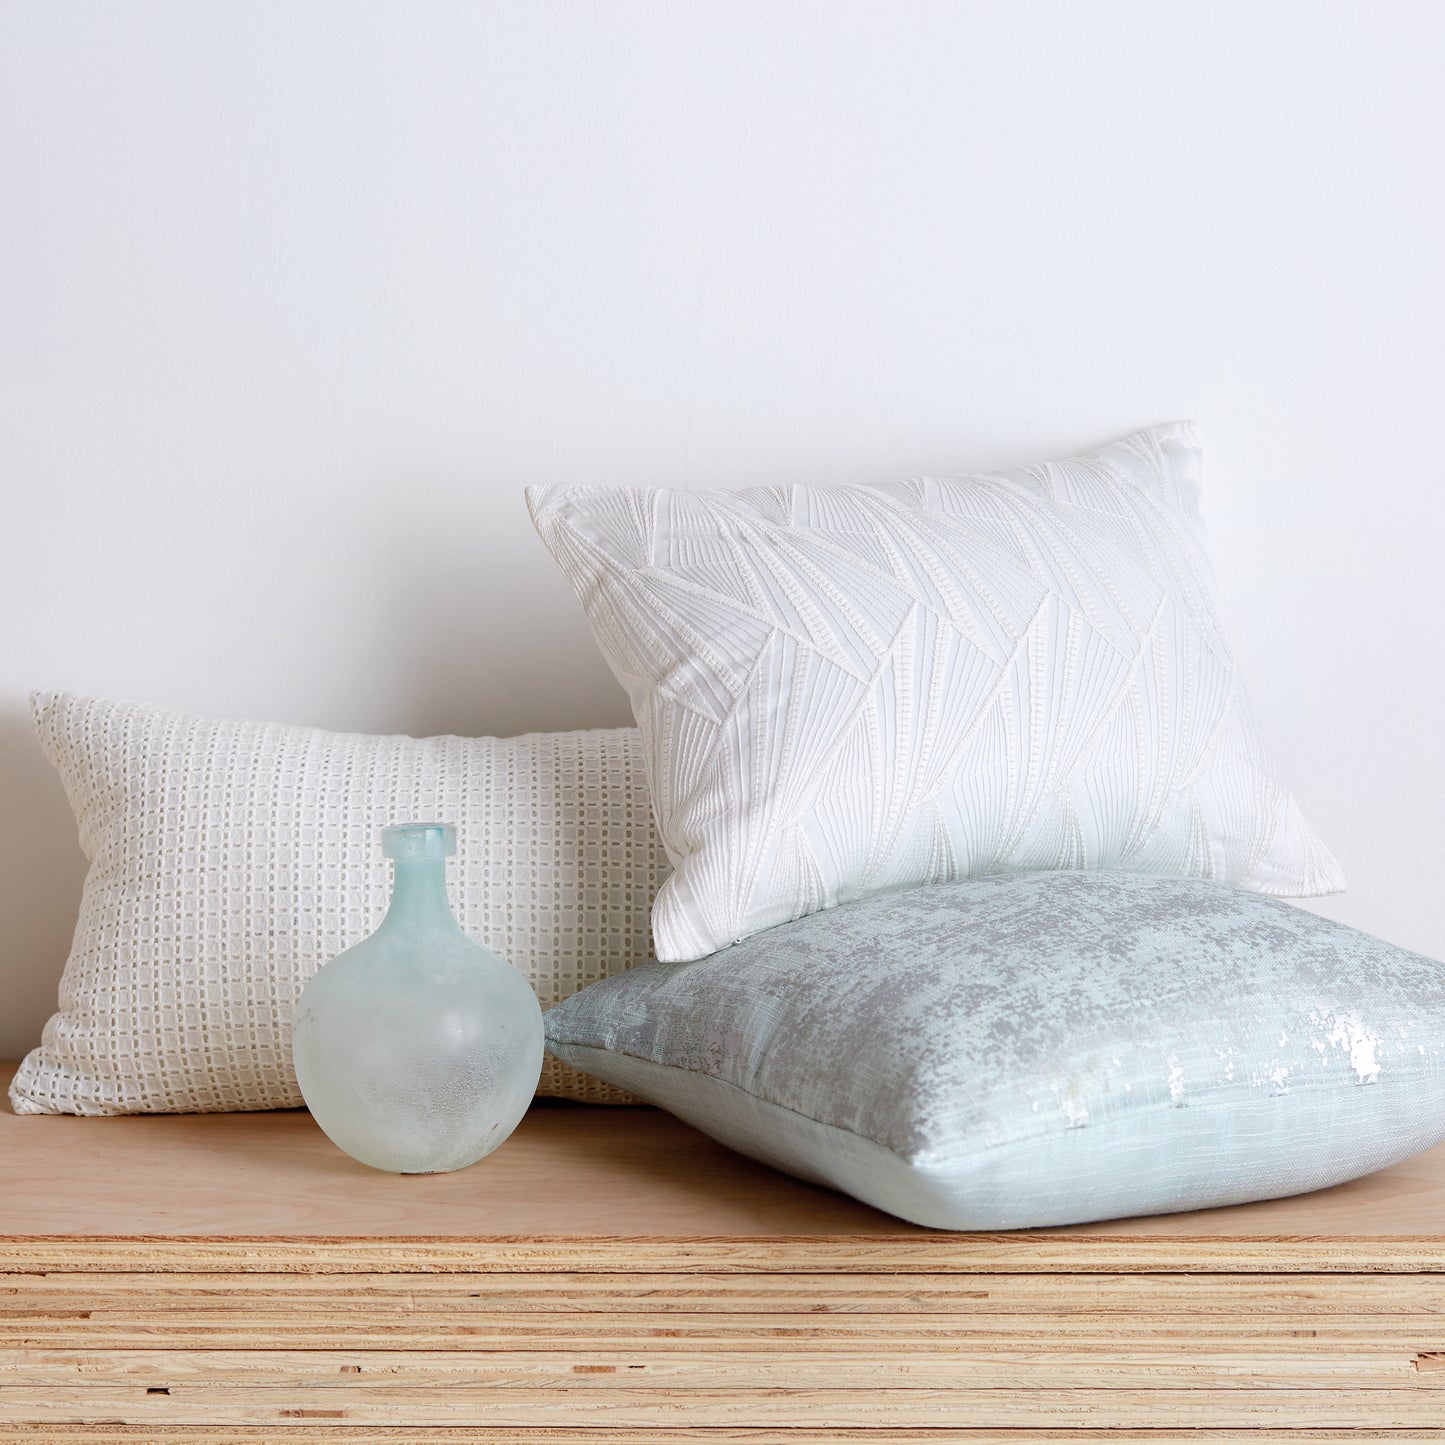 DKNY Refresh Decorative Pillow Collection